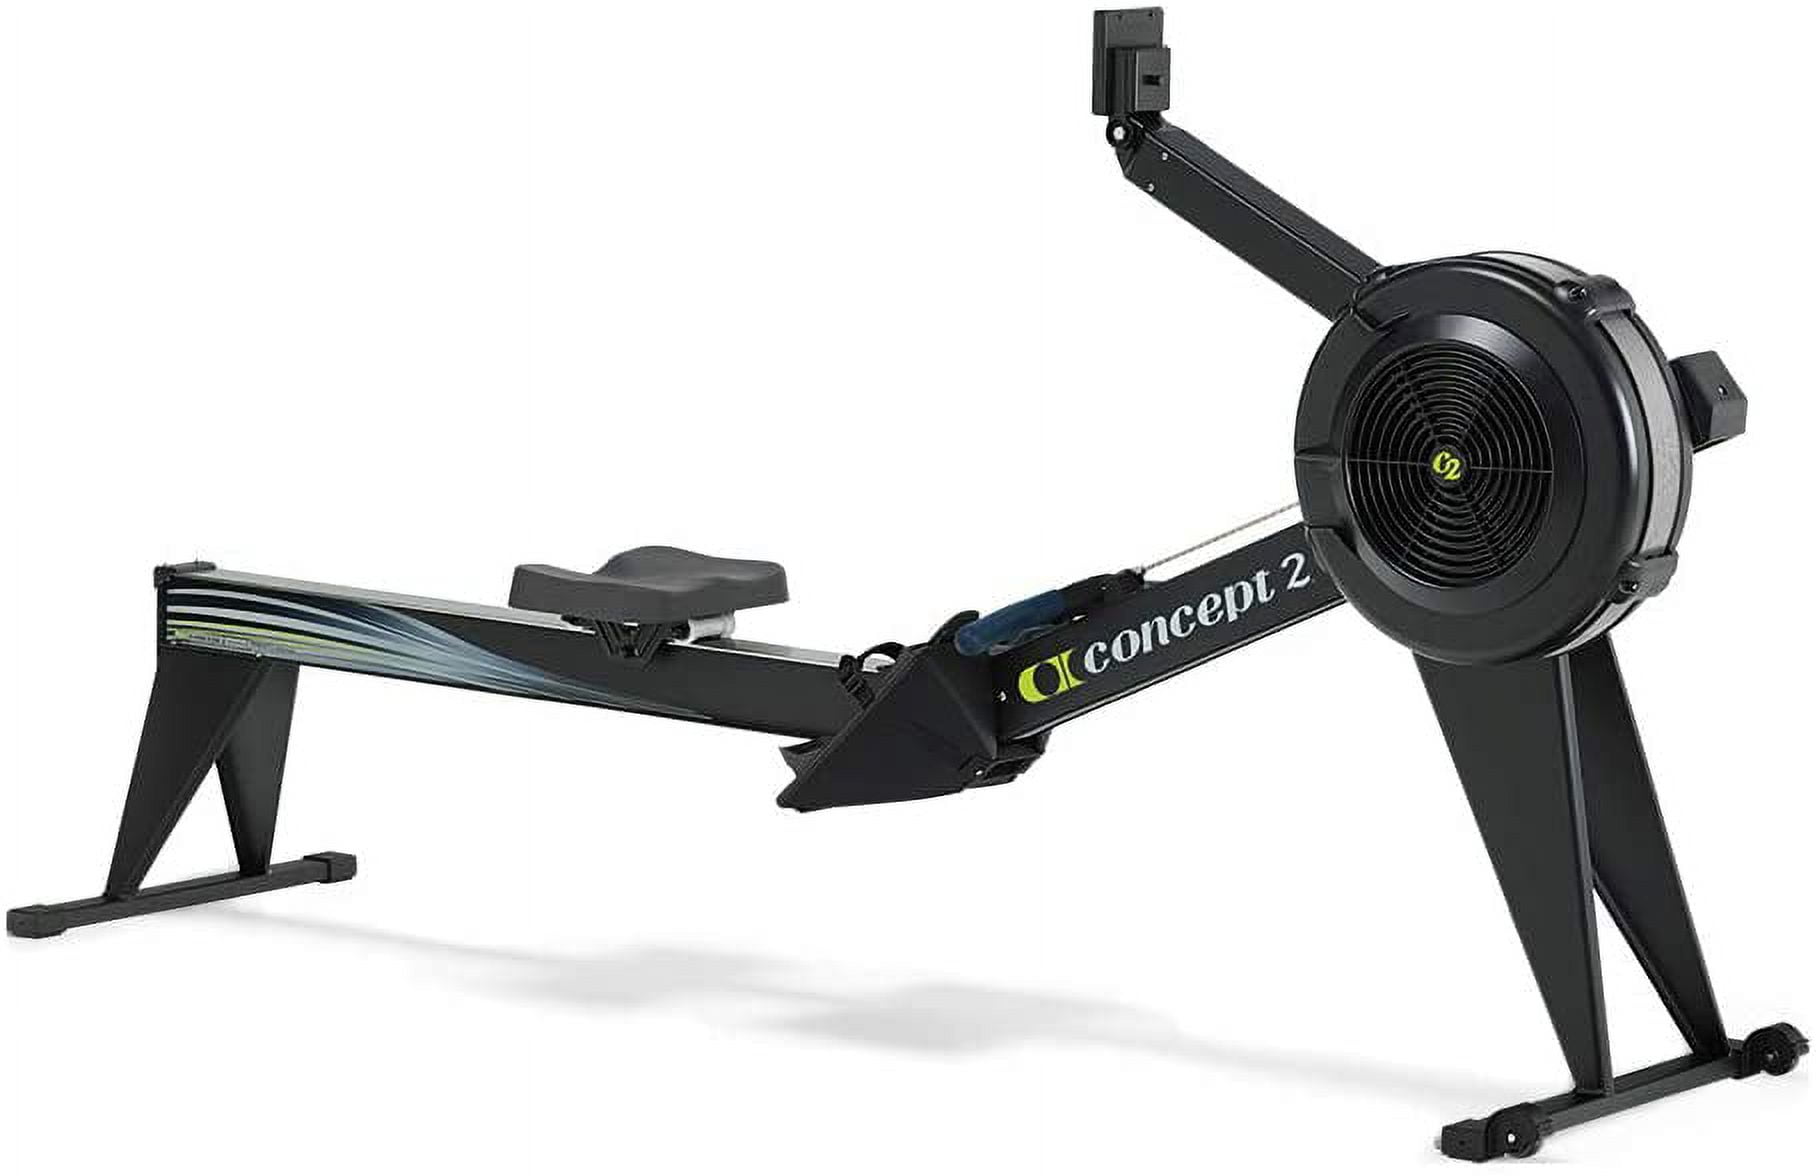  Concept2 RowErg Indoor Rowing Machine with Tall Legs - PM5  Monitor, Device Holder, Adjustable Air Resistance, Easy Storage : Sports &  Outdoors